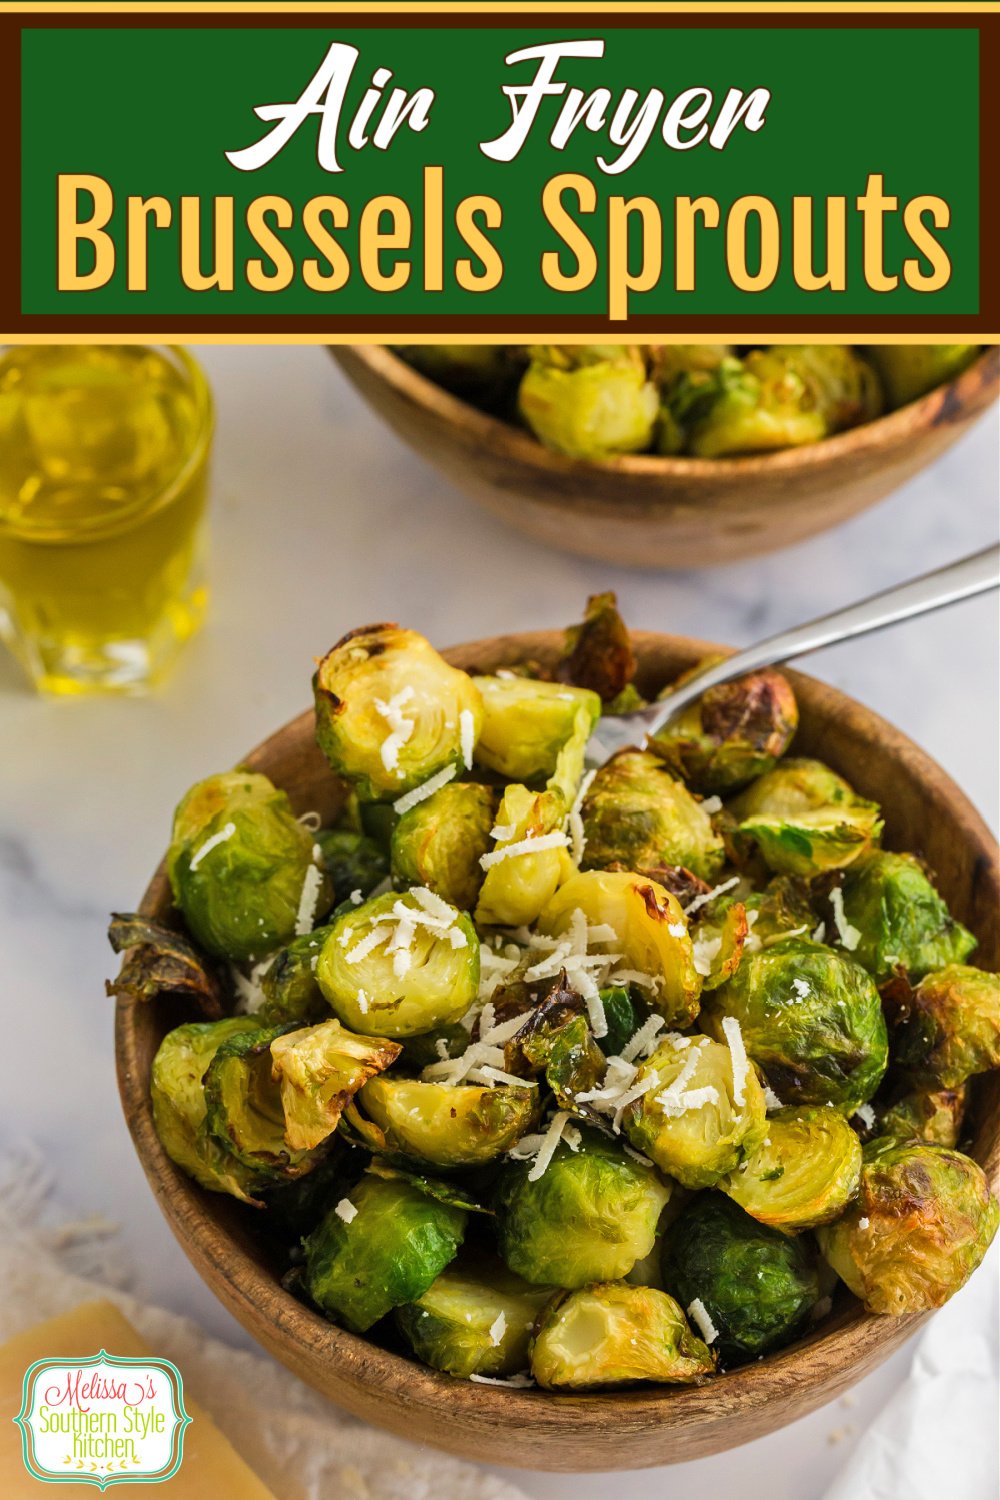 These Air Fryer Brussels Sprouts have a crispy exterior and tender interior that combines satisfying crunchiness with the natural flavor. #airfryerrecipes #brusselssprouts #brusselssproutsrecipe #easyairfryerbrusselssprouts #thanksgivingrecipes #lowcarbrecipes #ketorecipes via @melissasssk